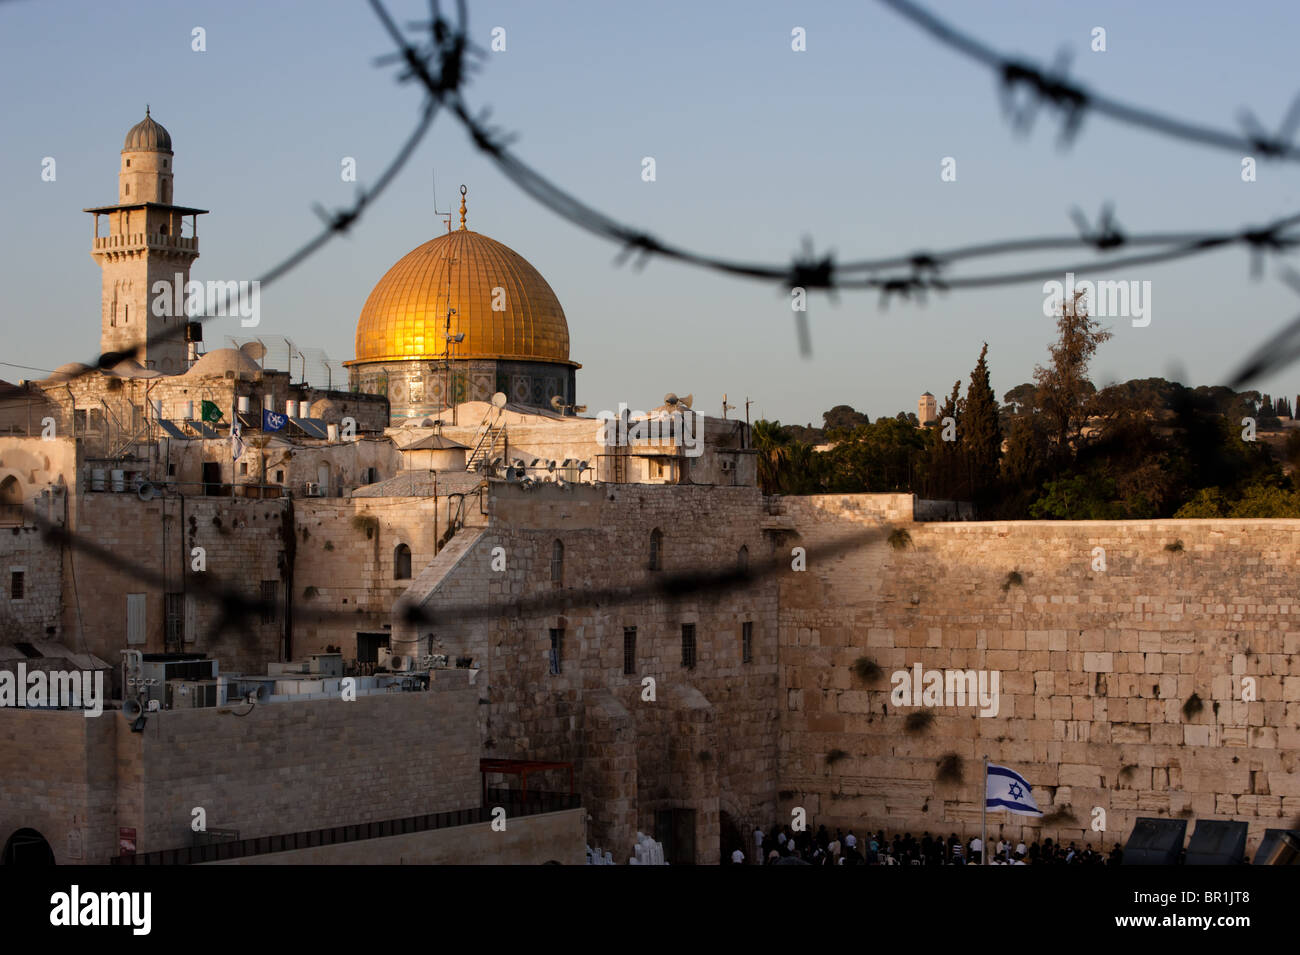 Two of Islam and Judaism's holiest sites, Jerusalem's Dome of the Rock and the Western Wall, seen through barbed wire. Stock Photo